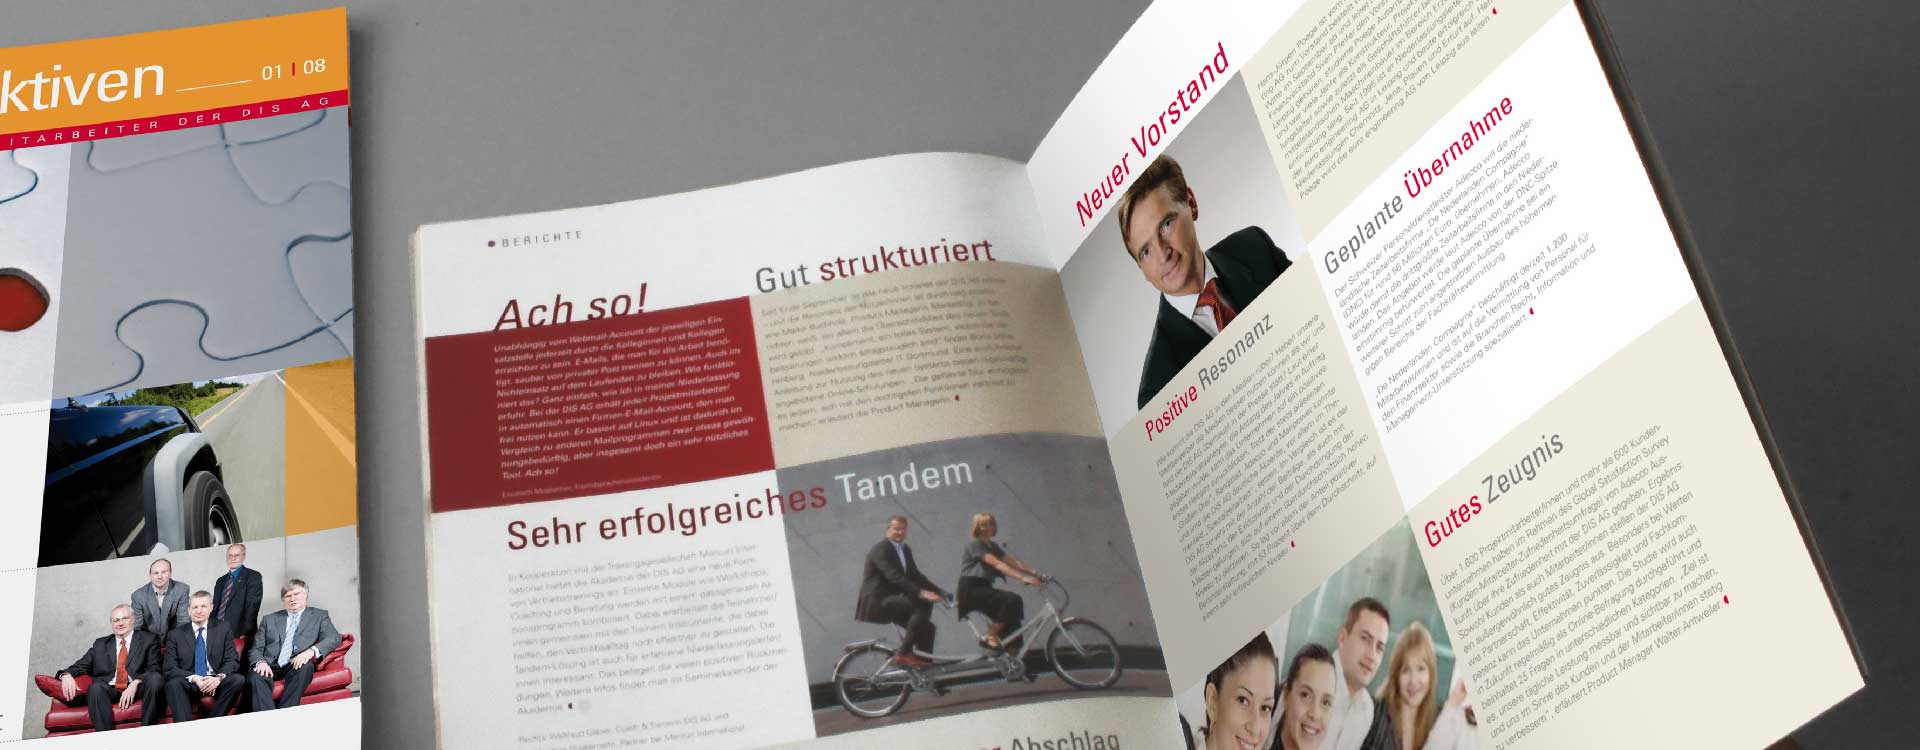 Inside pages of the employee magazine Perspektiven for the DIS AG